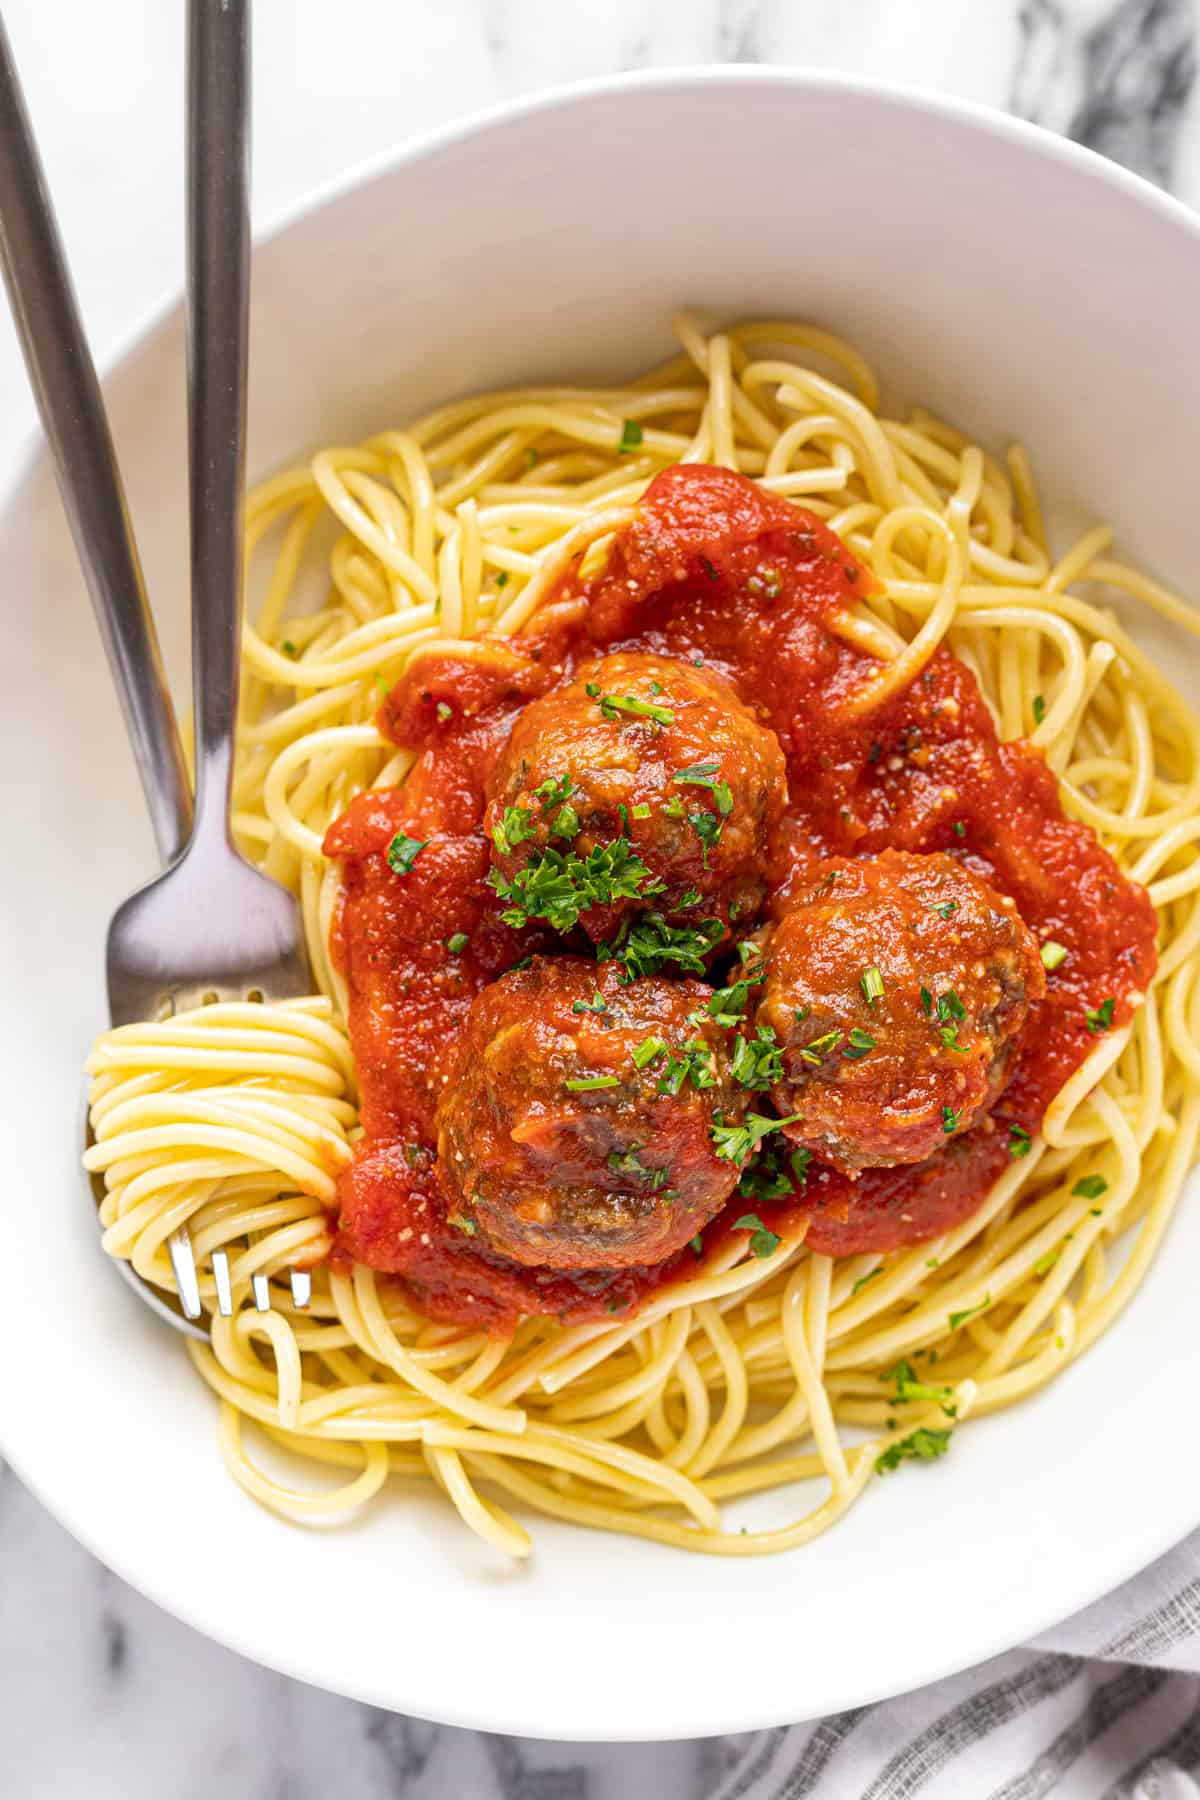 White bowl filled with spaghetti, meatballs, and marinara sauce.